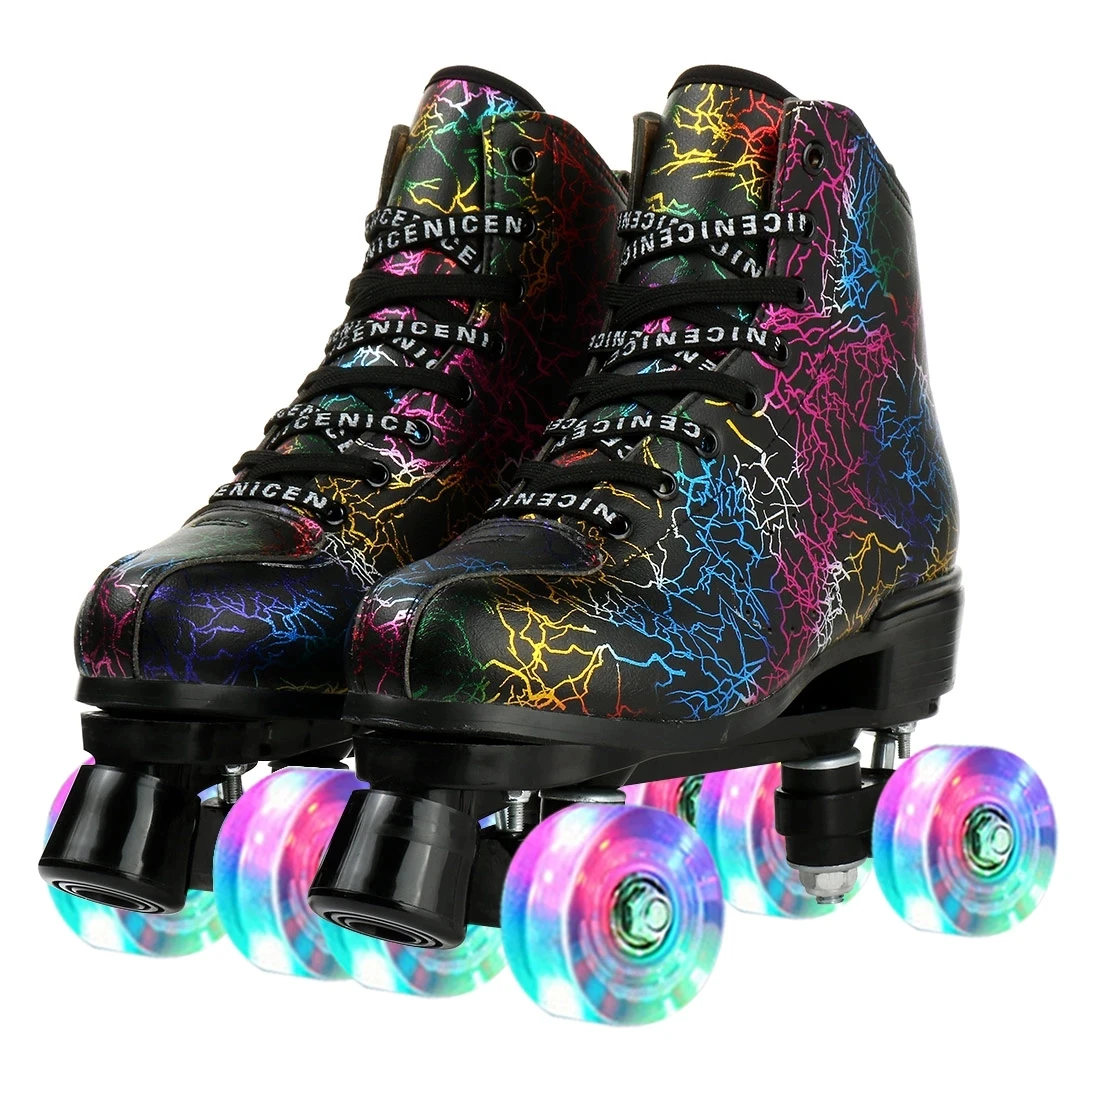 Roller Skates Flash 4 Wheels Shoes Black Artificial Leather Adult Double Row Quad Sneakers Outdoor Indoor Sport Roller Shoes